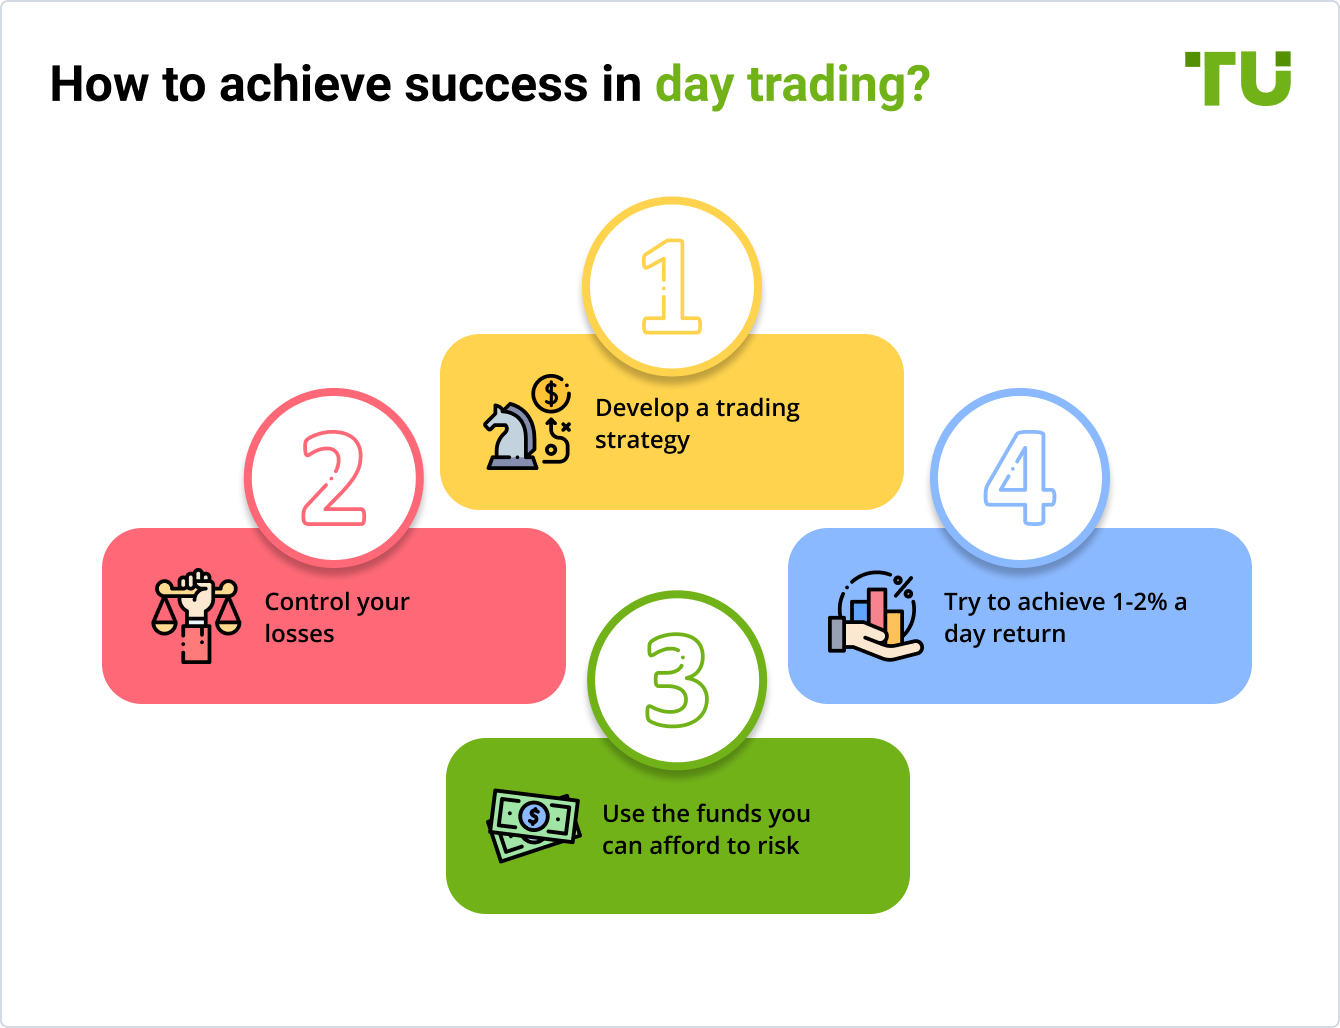 How to achieve success in day trading?